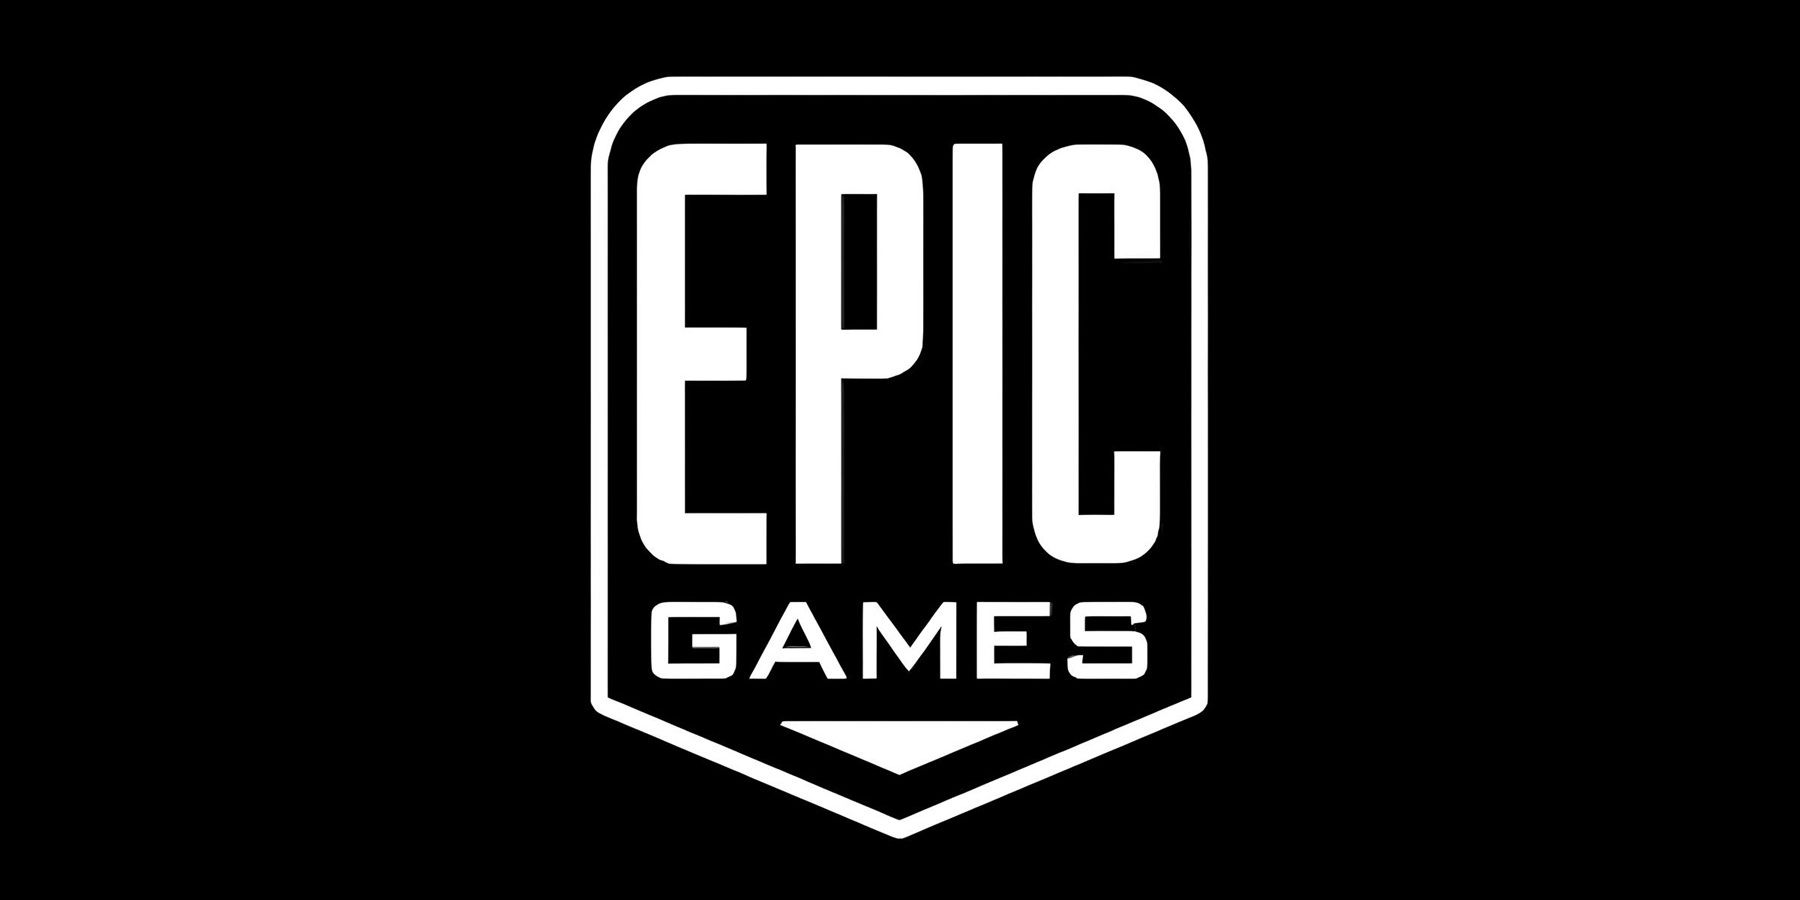 epic games responds to ransomware attack claims